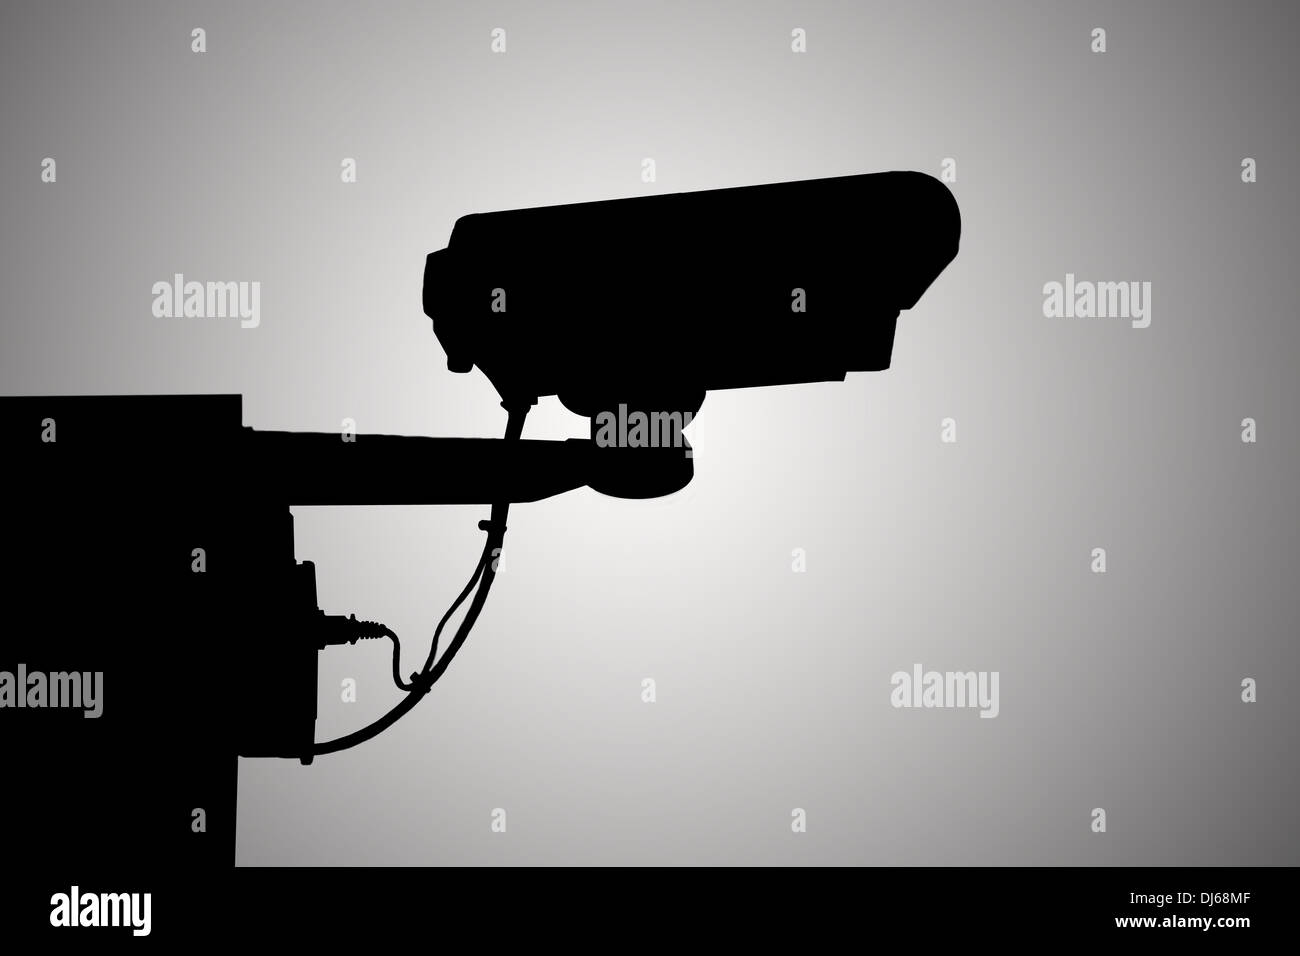 Silhouette Camera Video Record in black and white background. Stock Photo